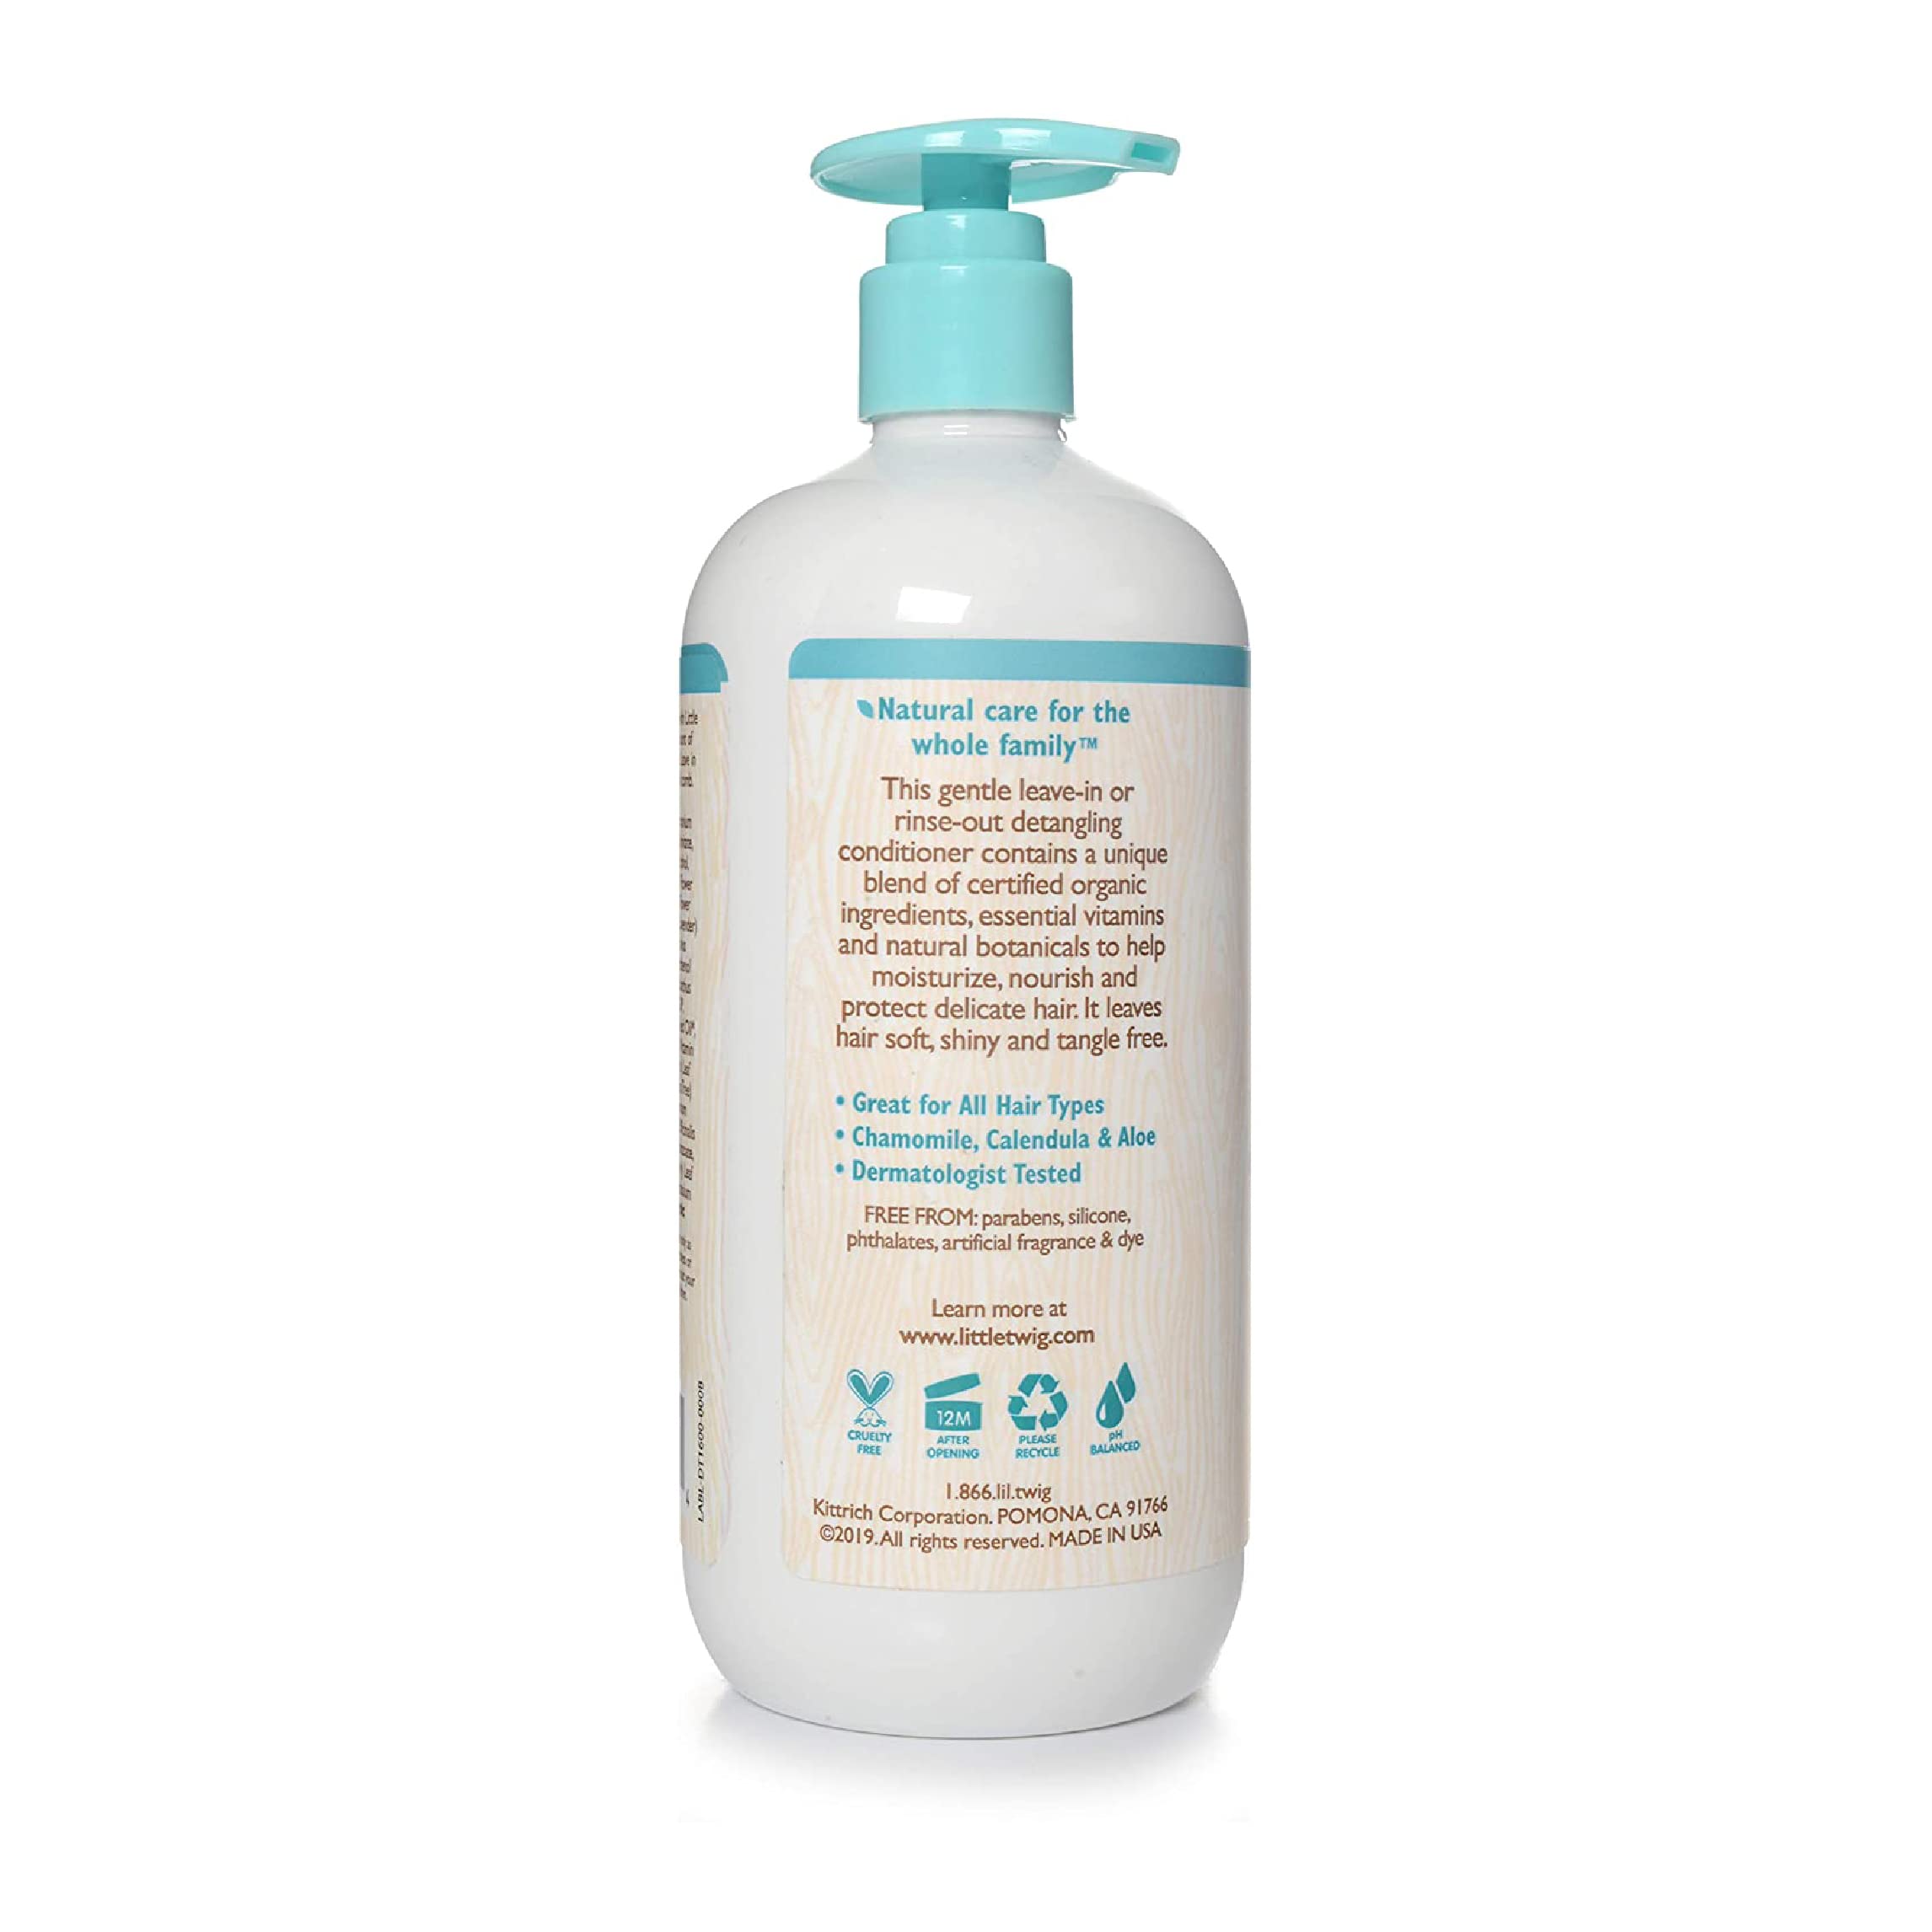 Little Twig Hair Conditioner, Natural Conditioner with Plant Derived Formula, Contains Essential Oils and Extracts, Suitable for Whole Family, Fragrance-Free, 17 fl oz.